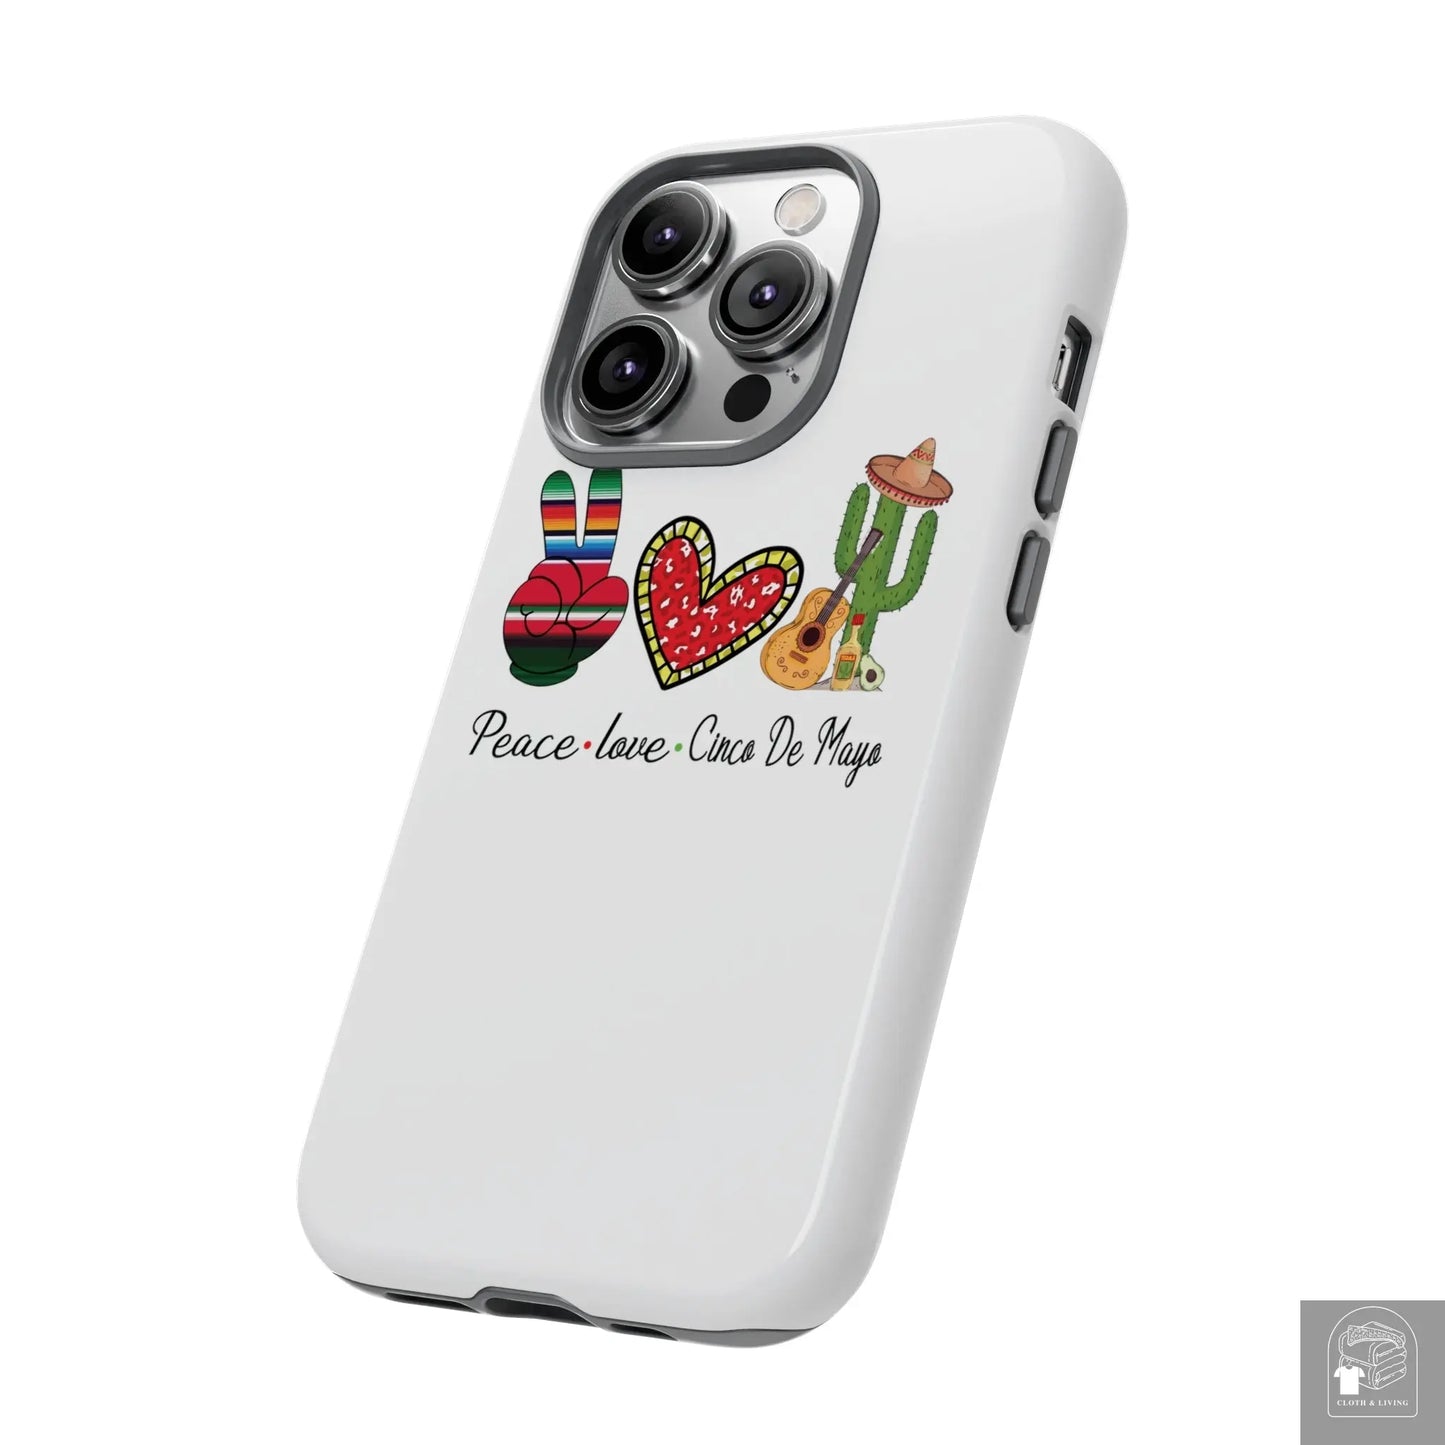 Peace, Love, and Cinco de Mayo Phone Case - Classic White Edition - Cloth & Living